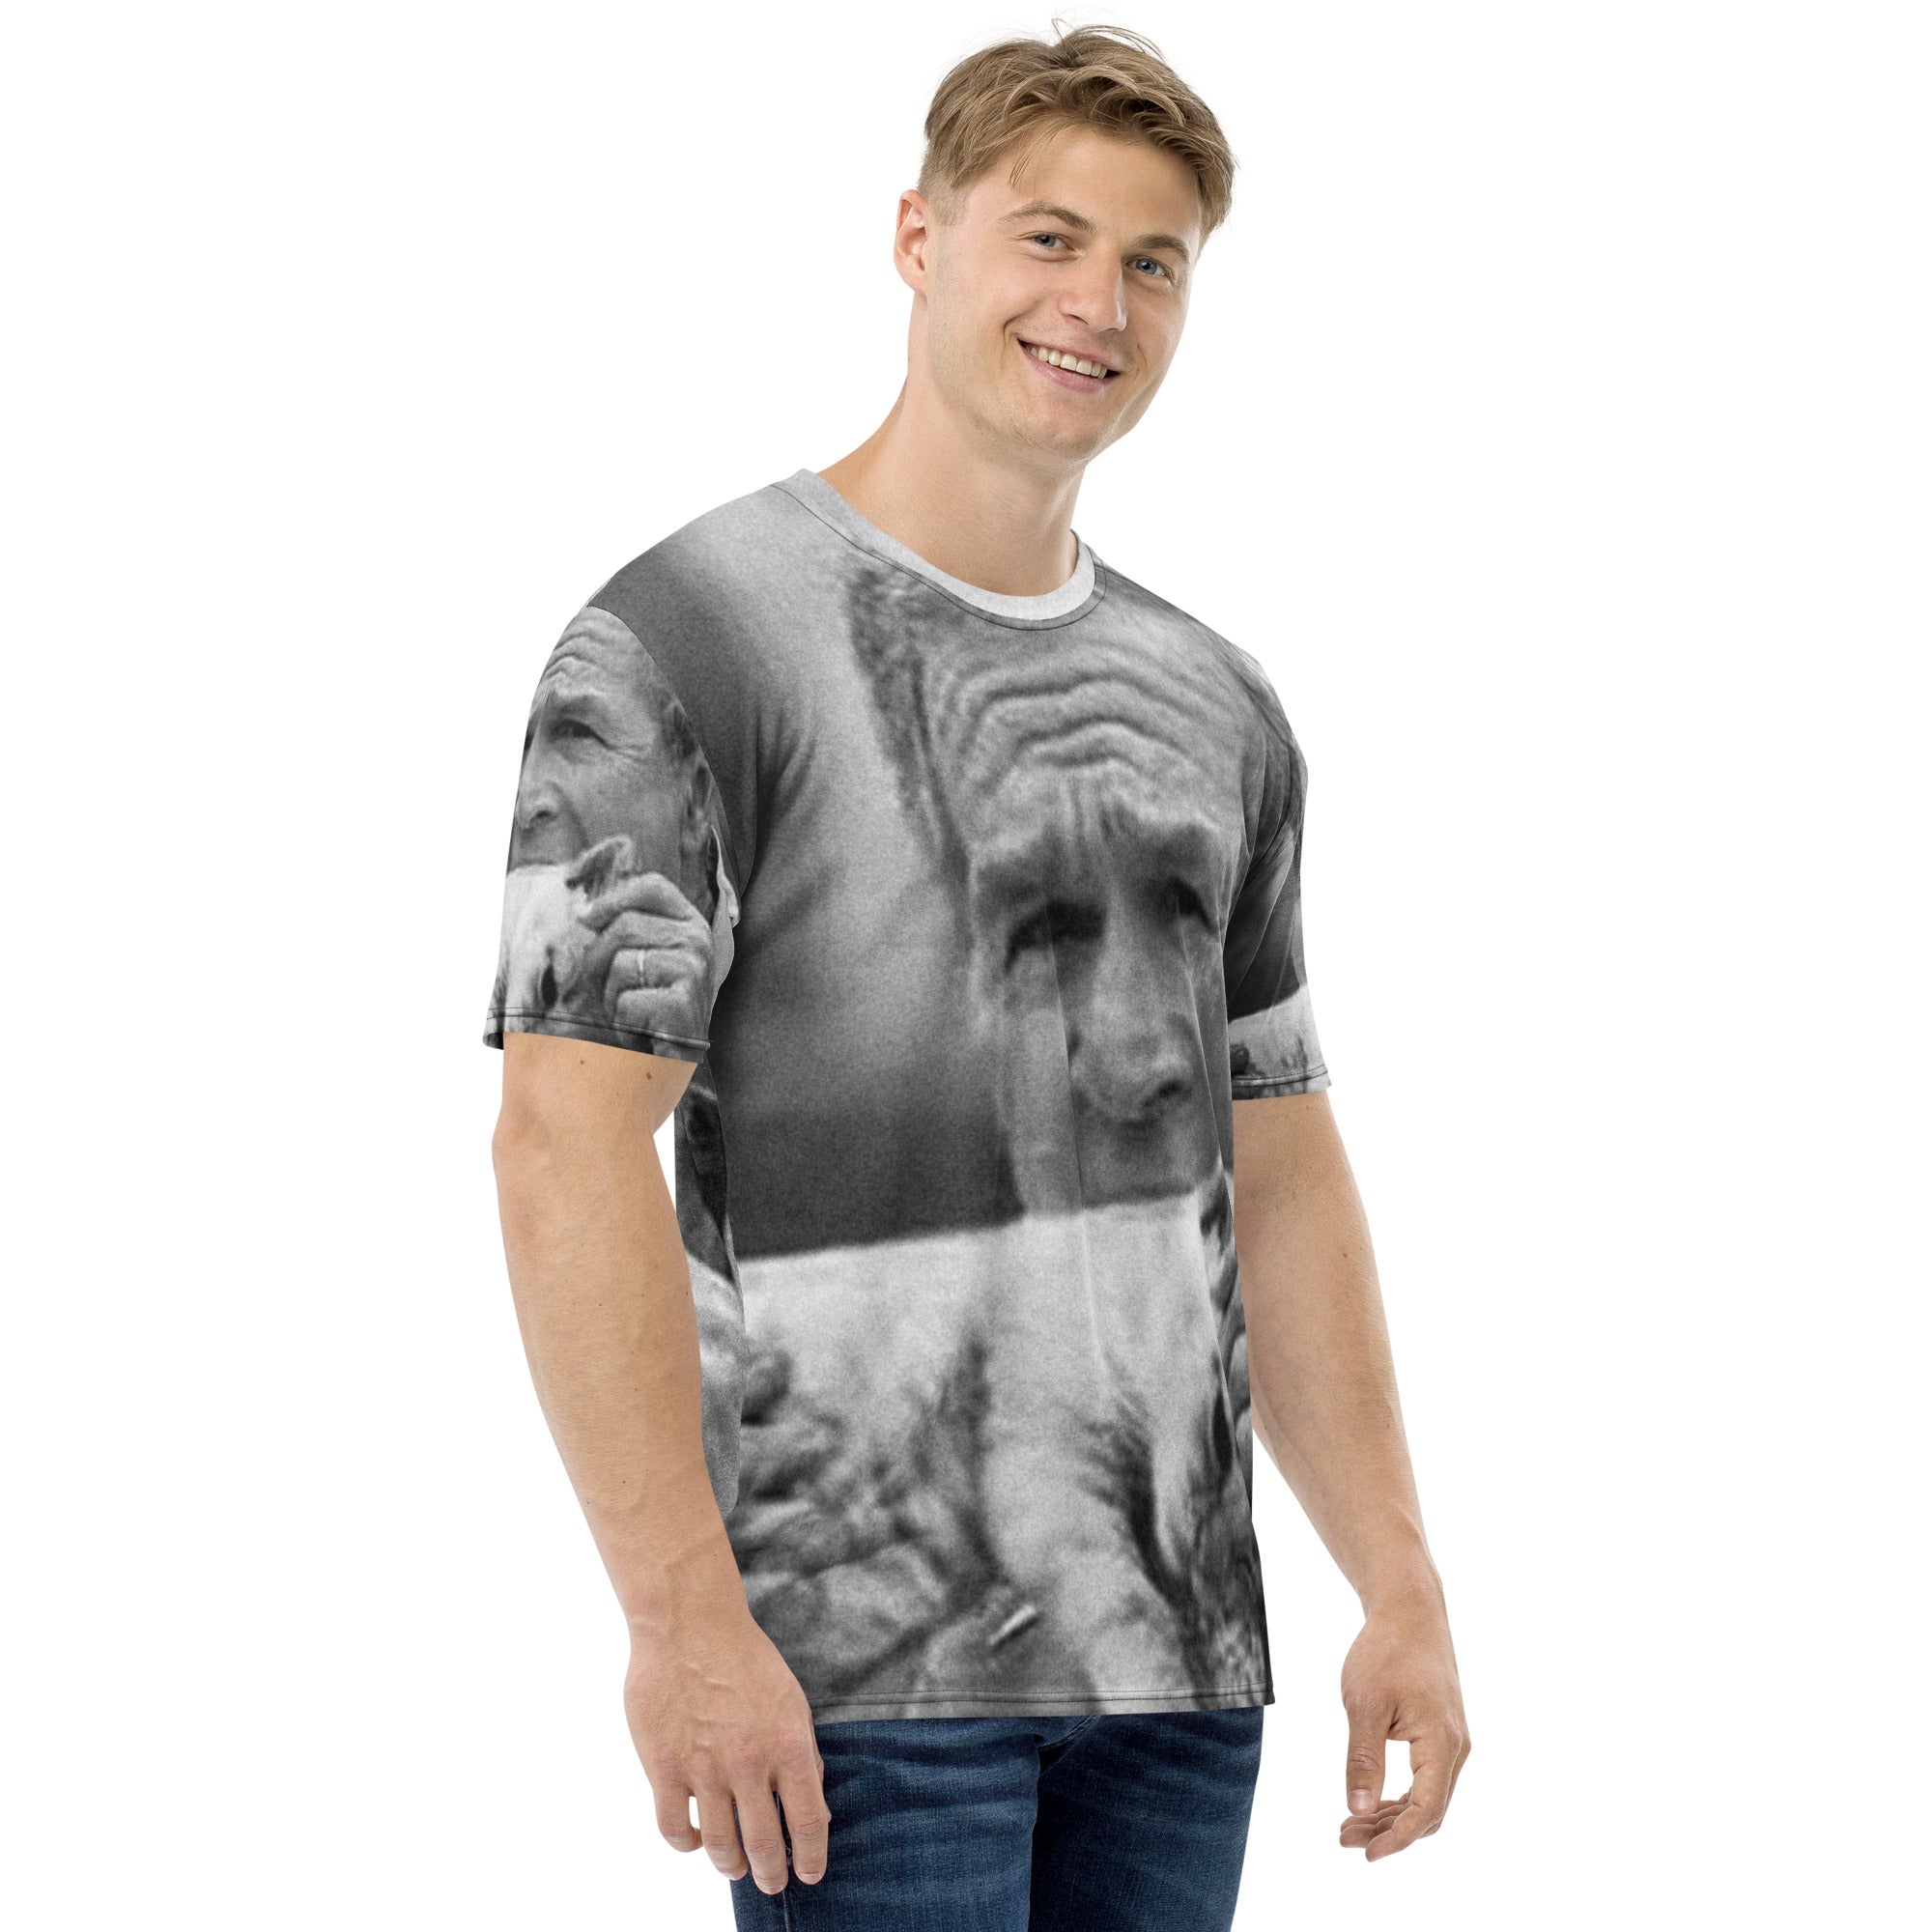 George Bush Eating Pussy All-Over Print T-Shirt